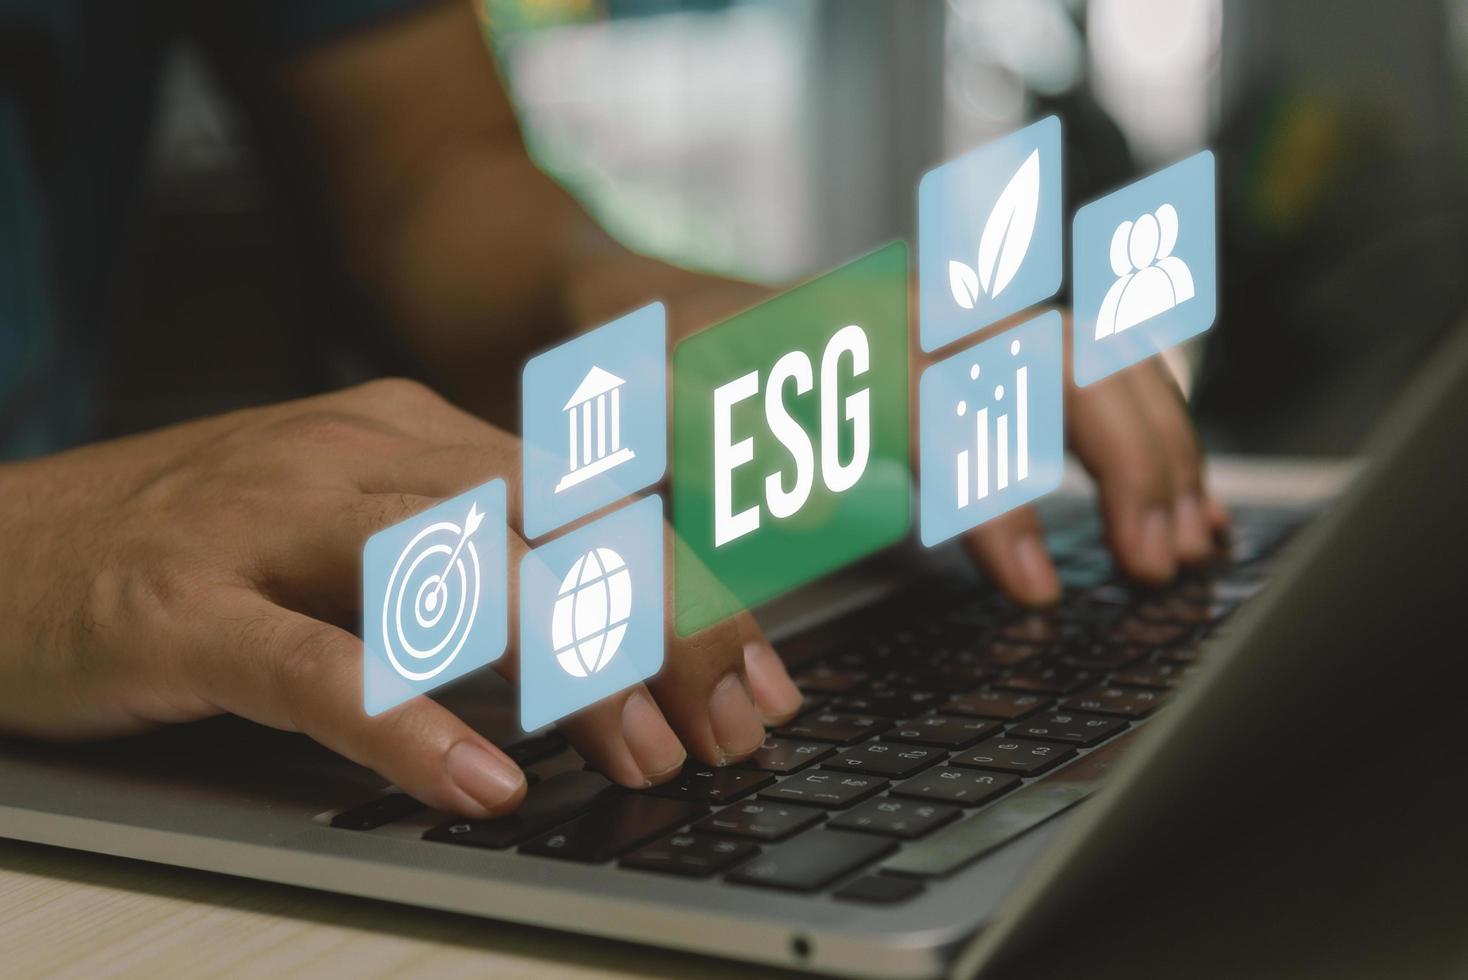 ESG environment social governance investment business concept. hand using computer laptop icon symbol of esg on virtual screen concept. business investment strategy concept. photo